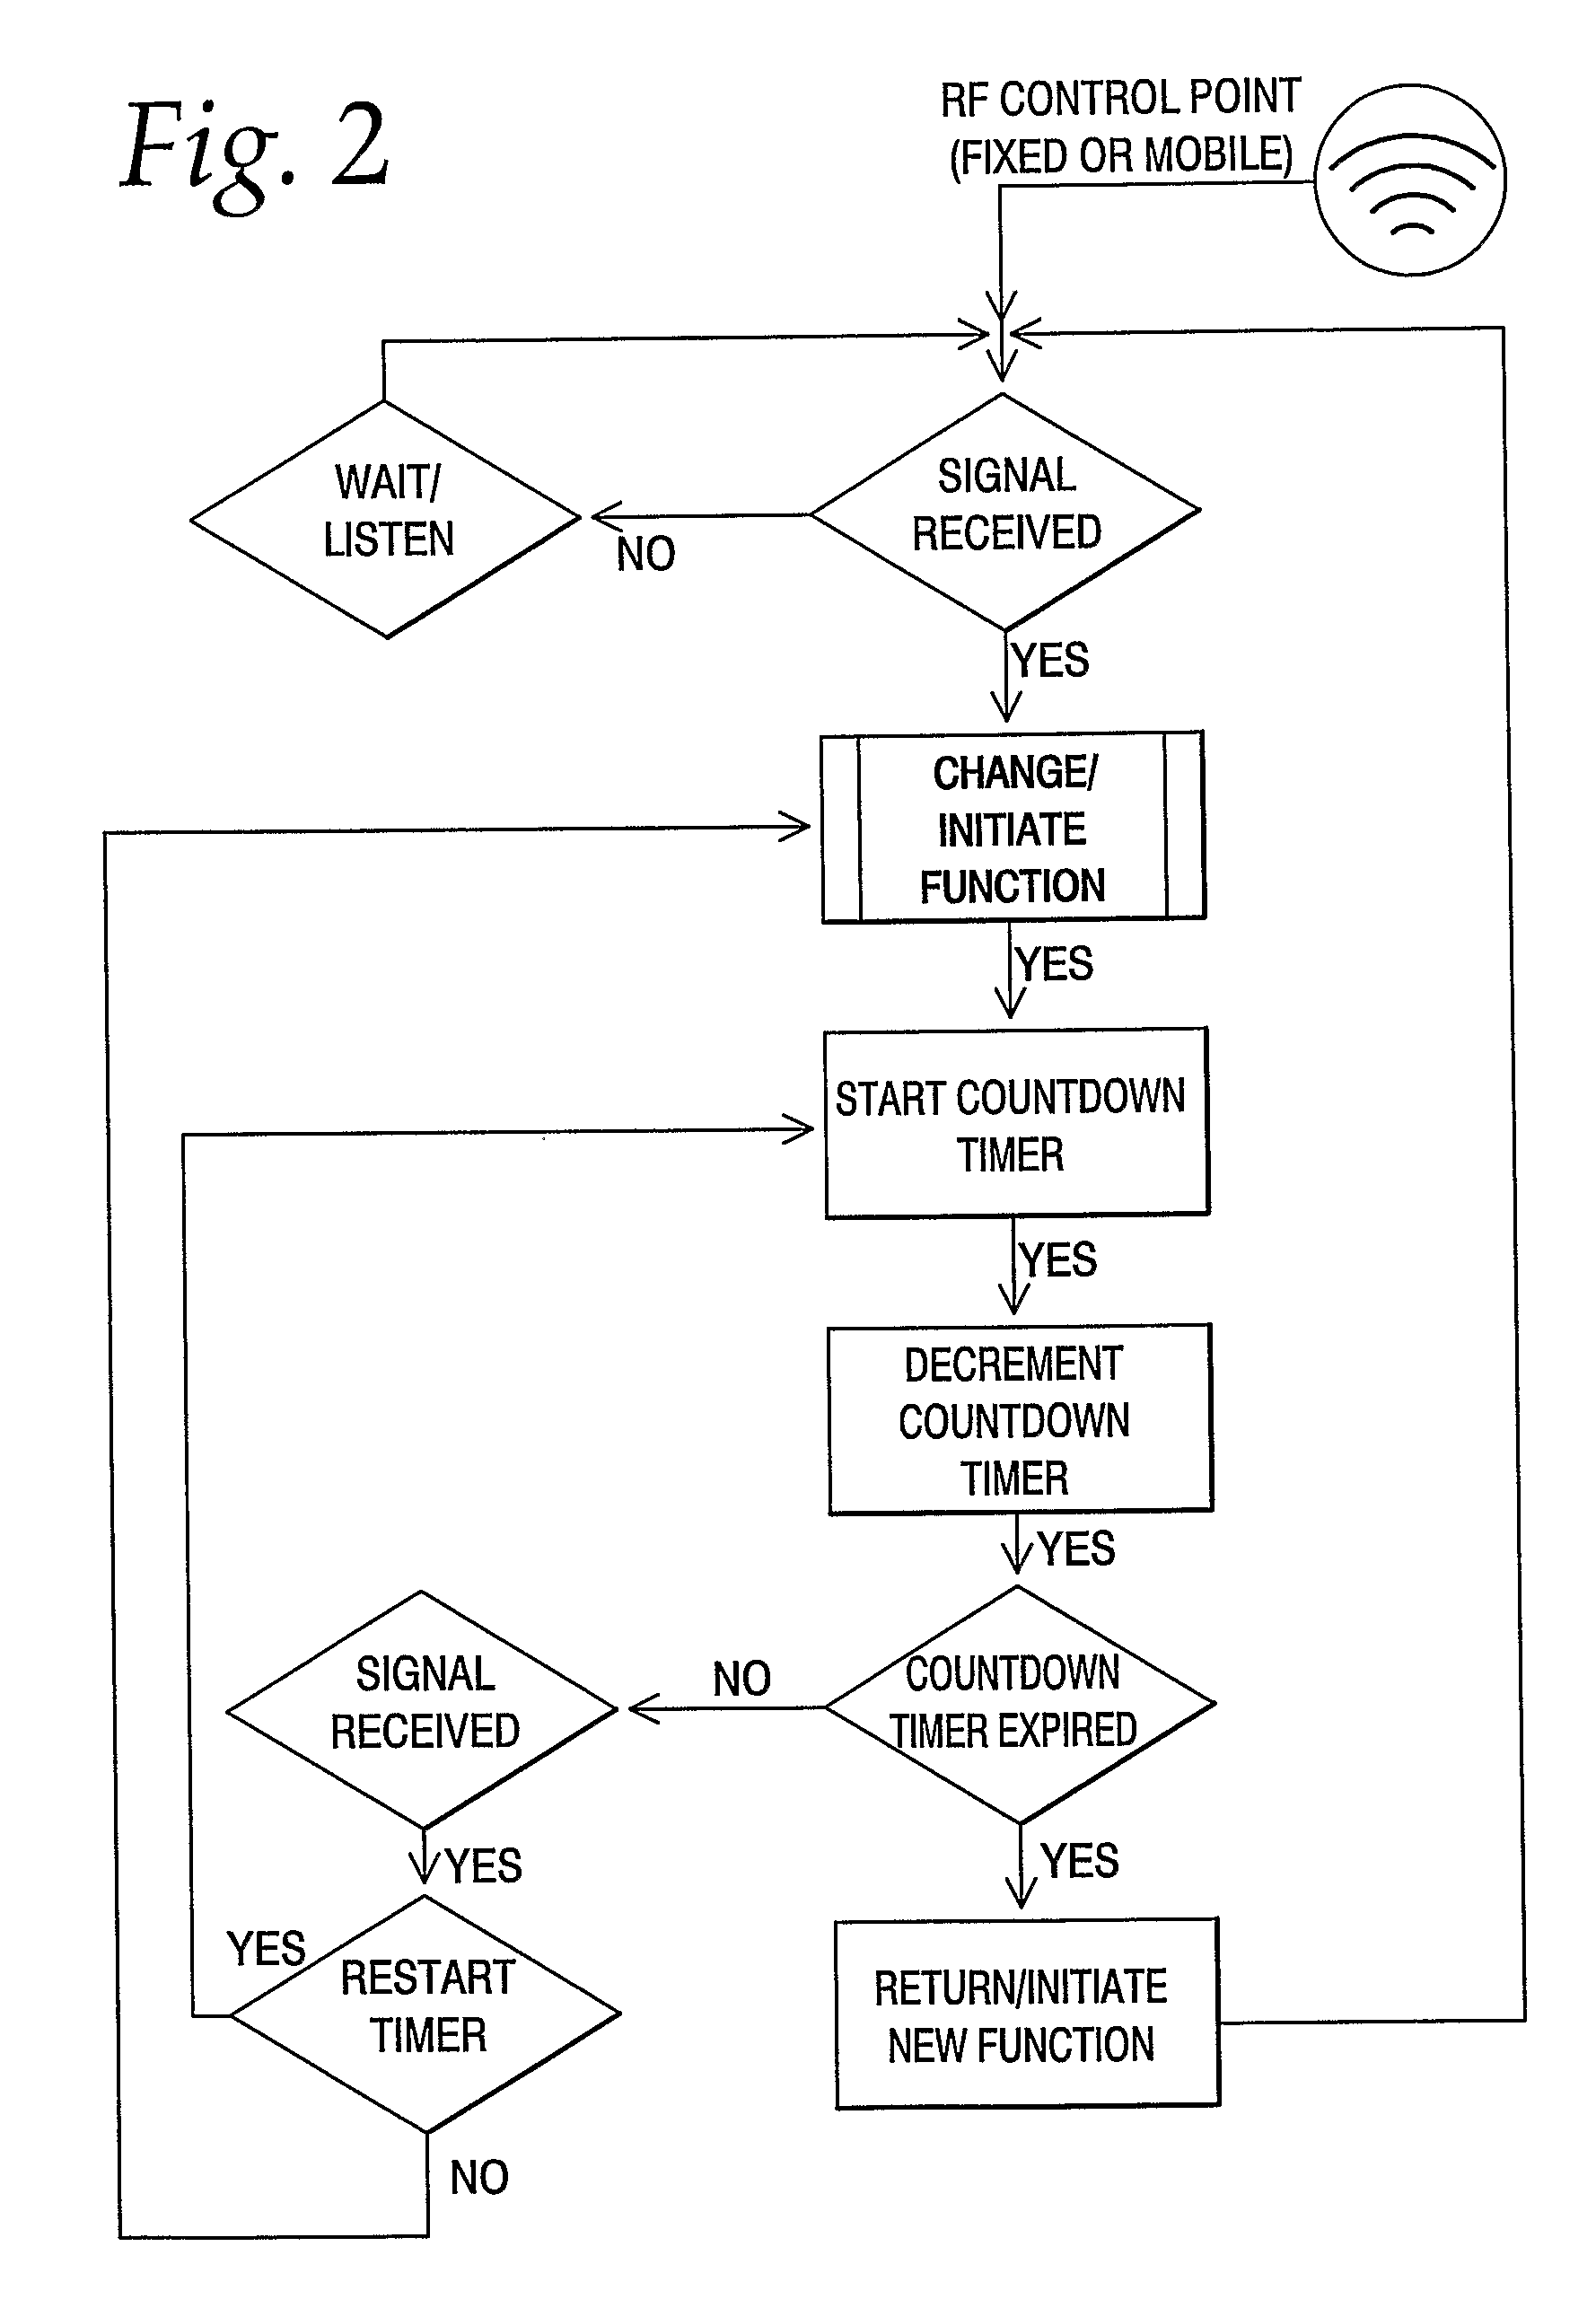 System for Initiating Geospatial Functional Control of Mobile Electronics